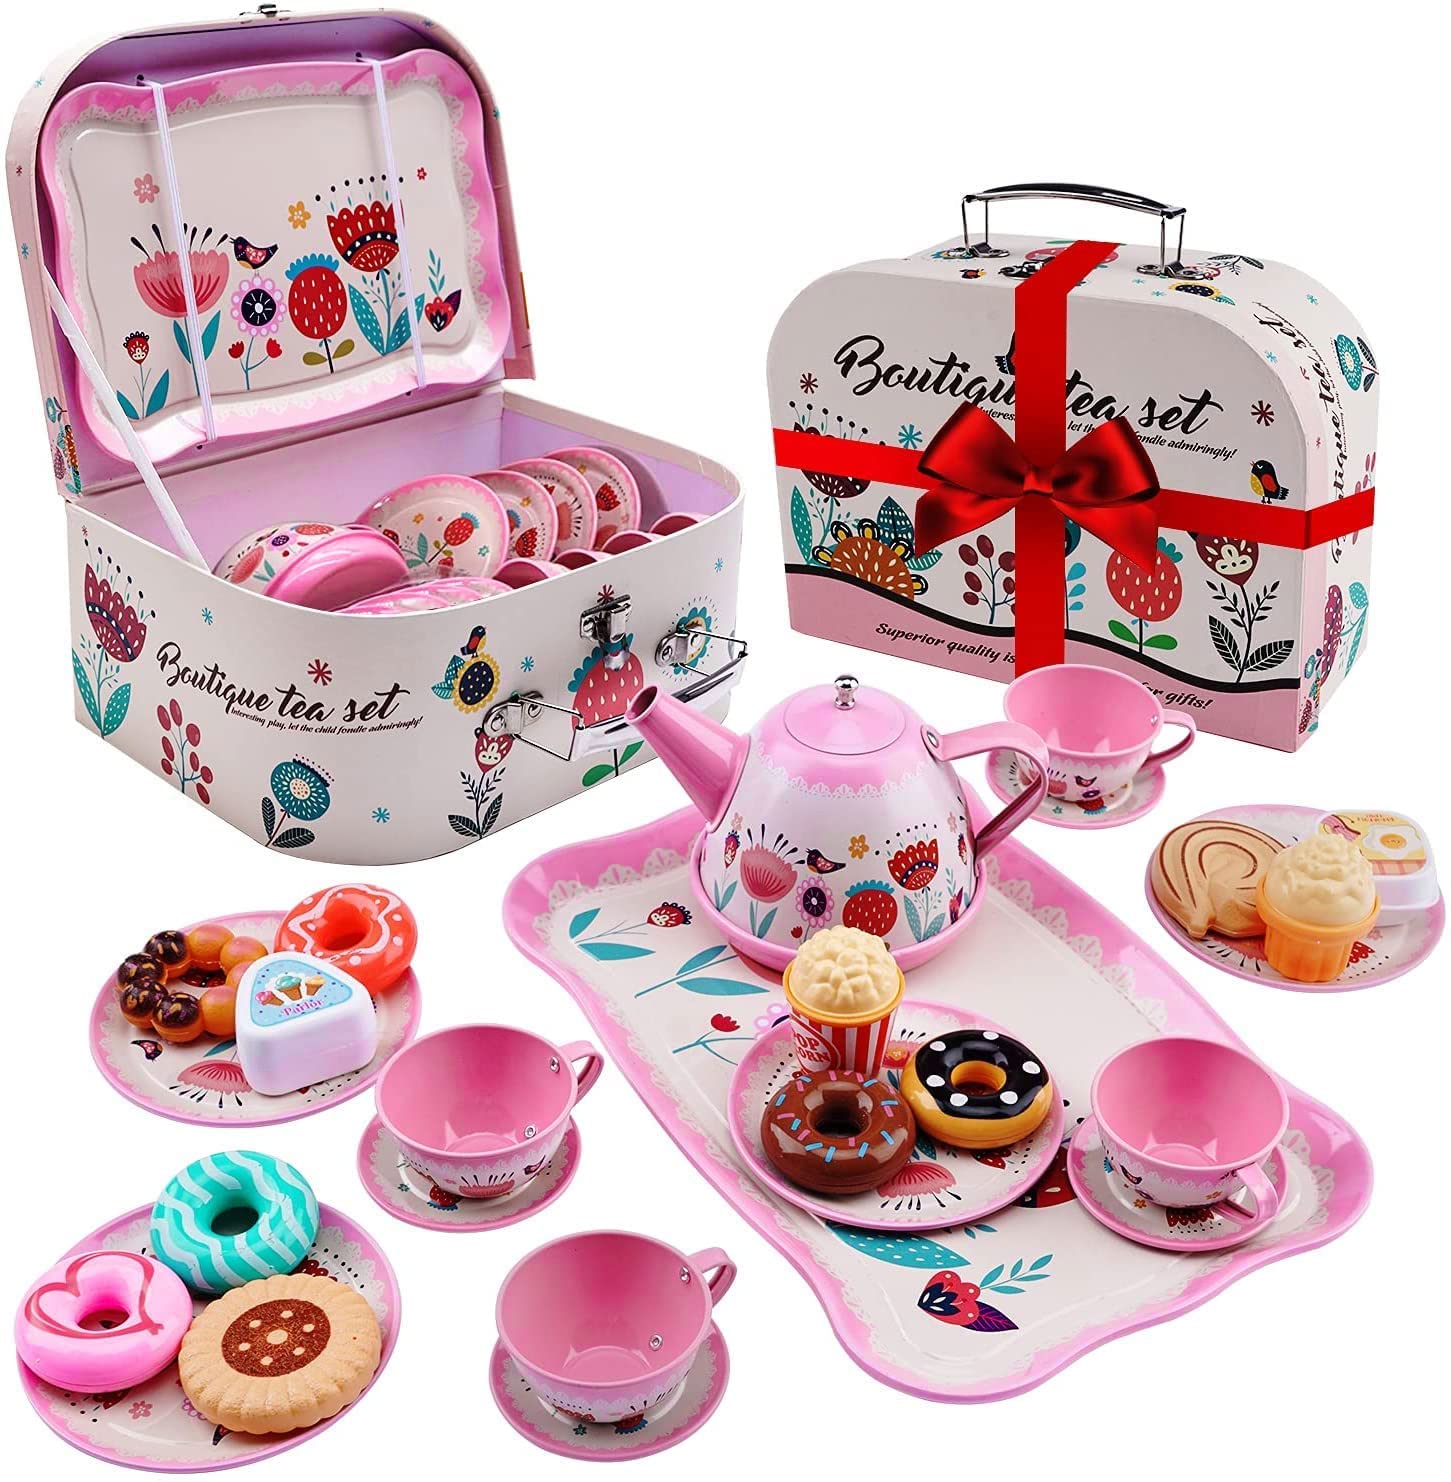 Toy Tea-Set Metal Food Teapot Cake Afternoon Kitchen Play Cups Childrens Saucers 